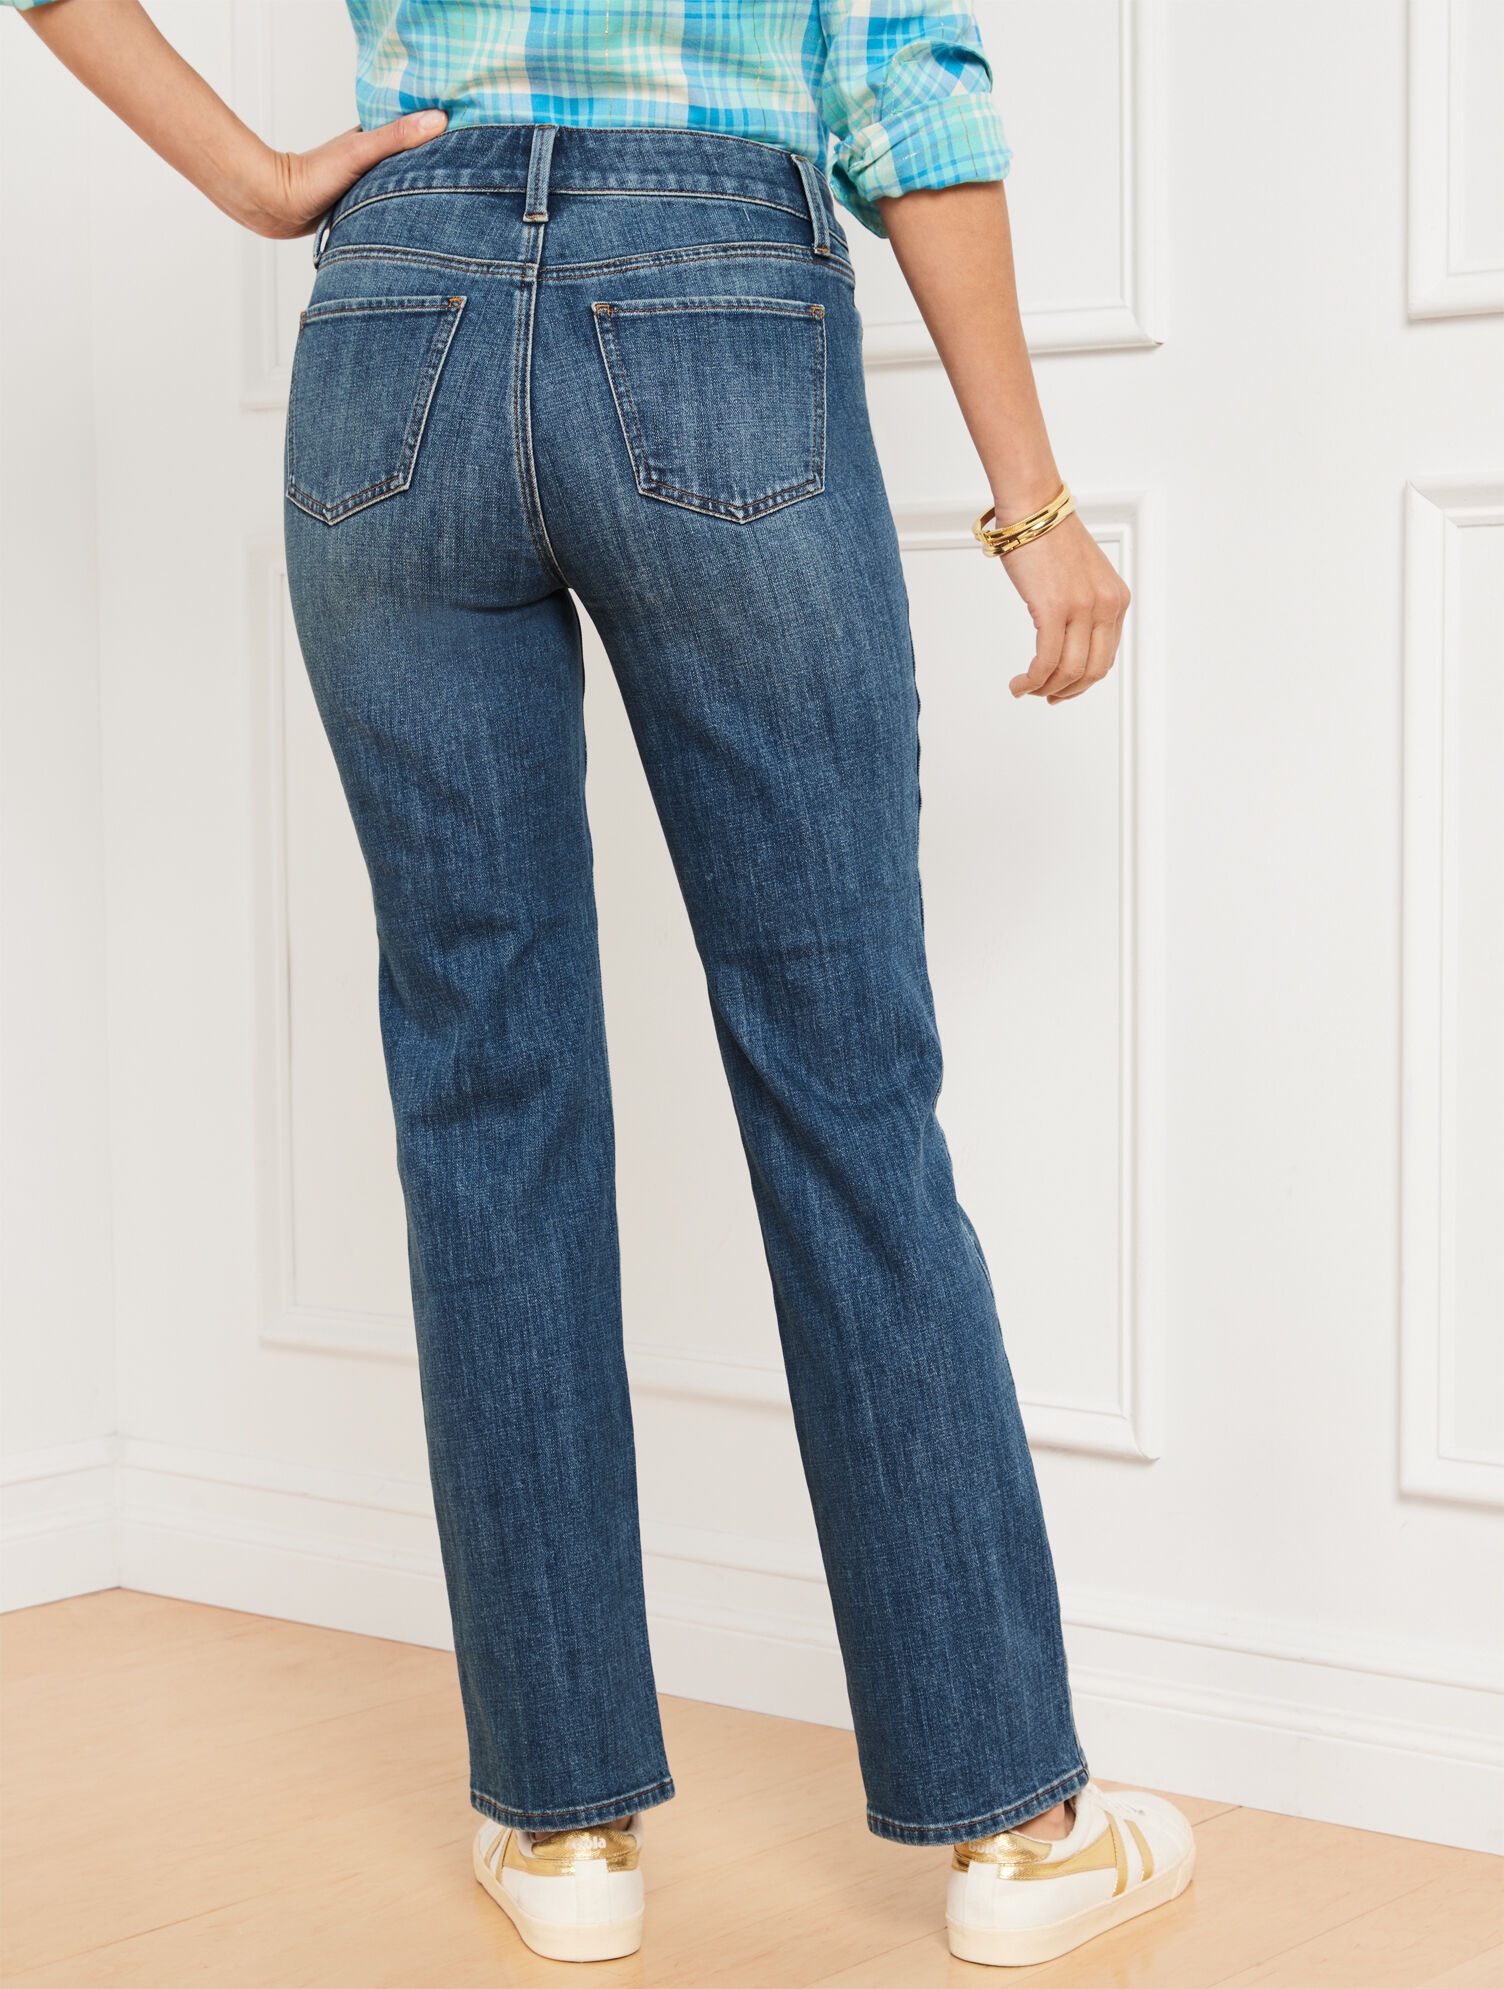 Barely Boot Jeans - Serena Wash | Talbots